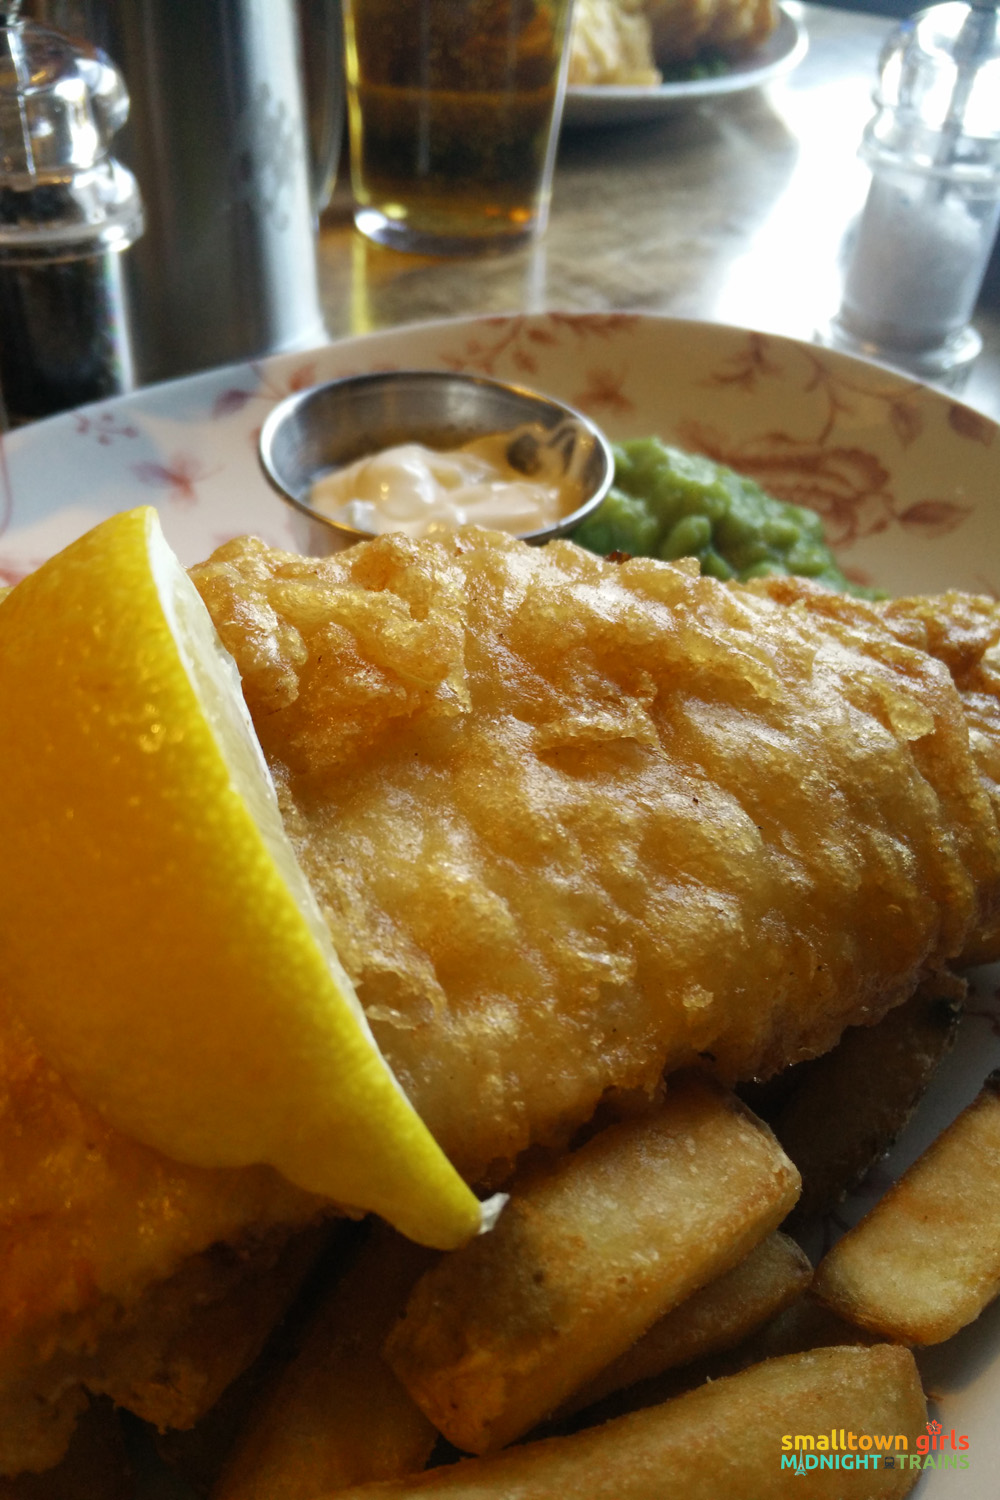 London fish and chips